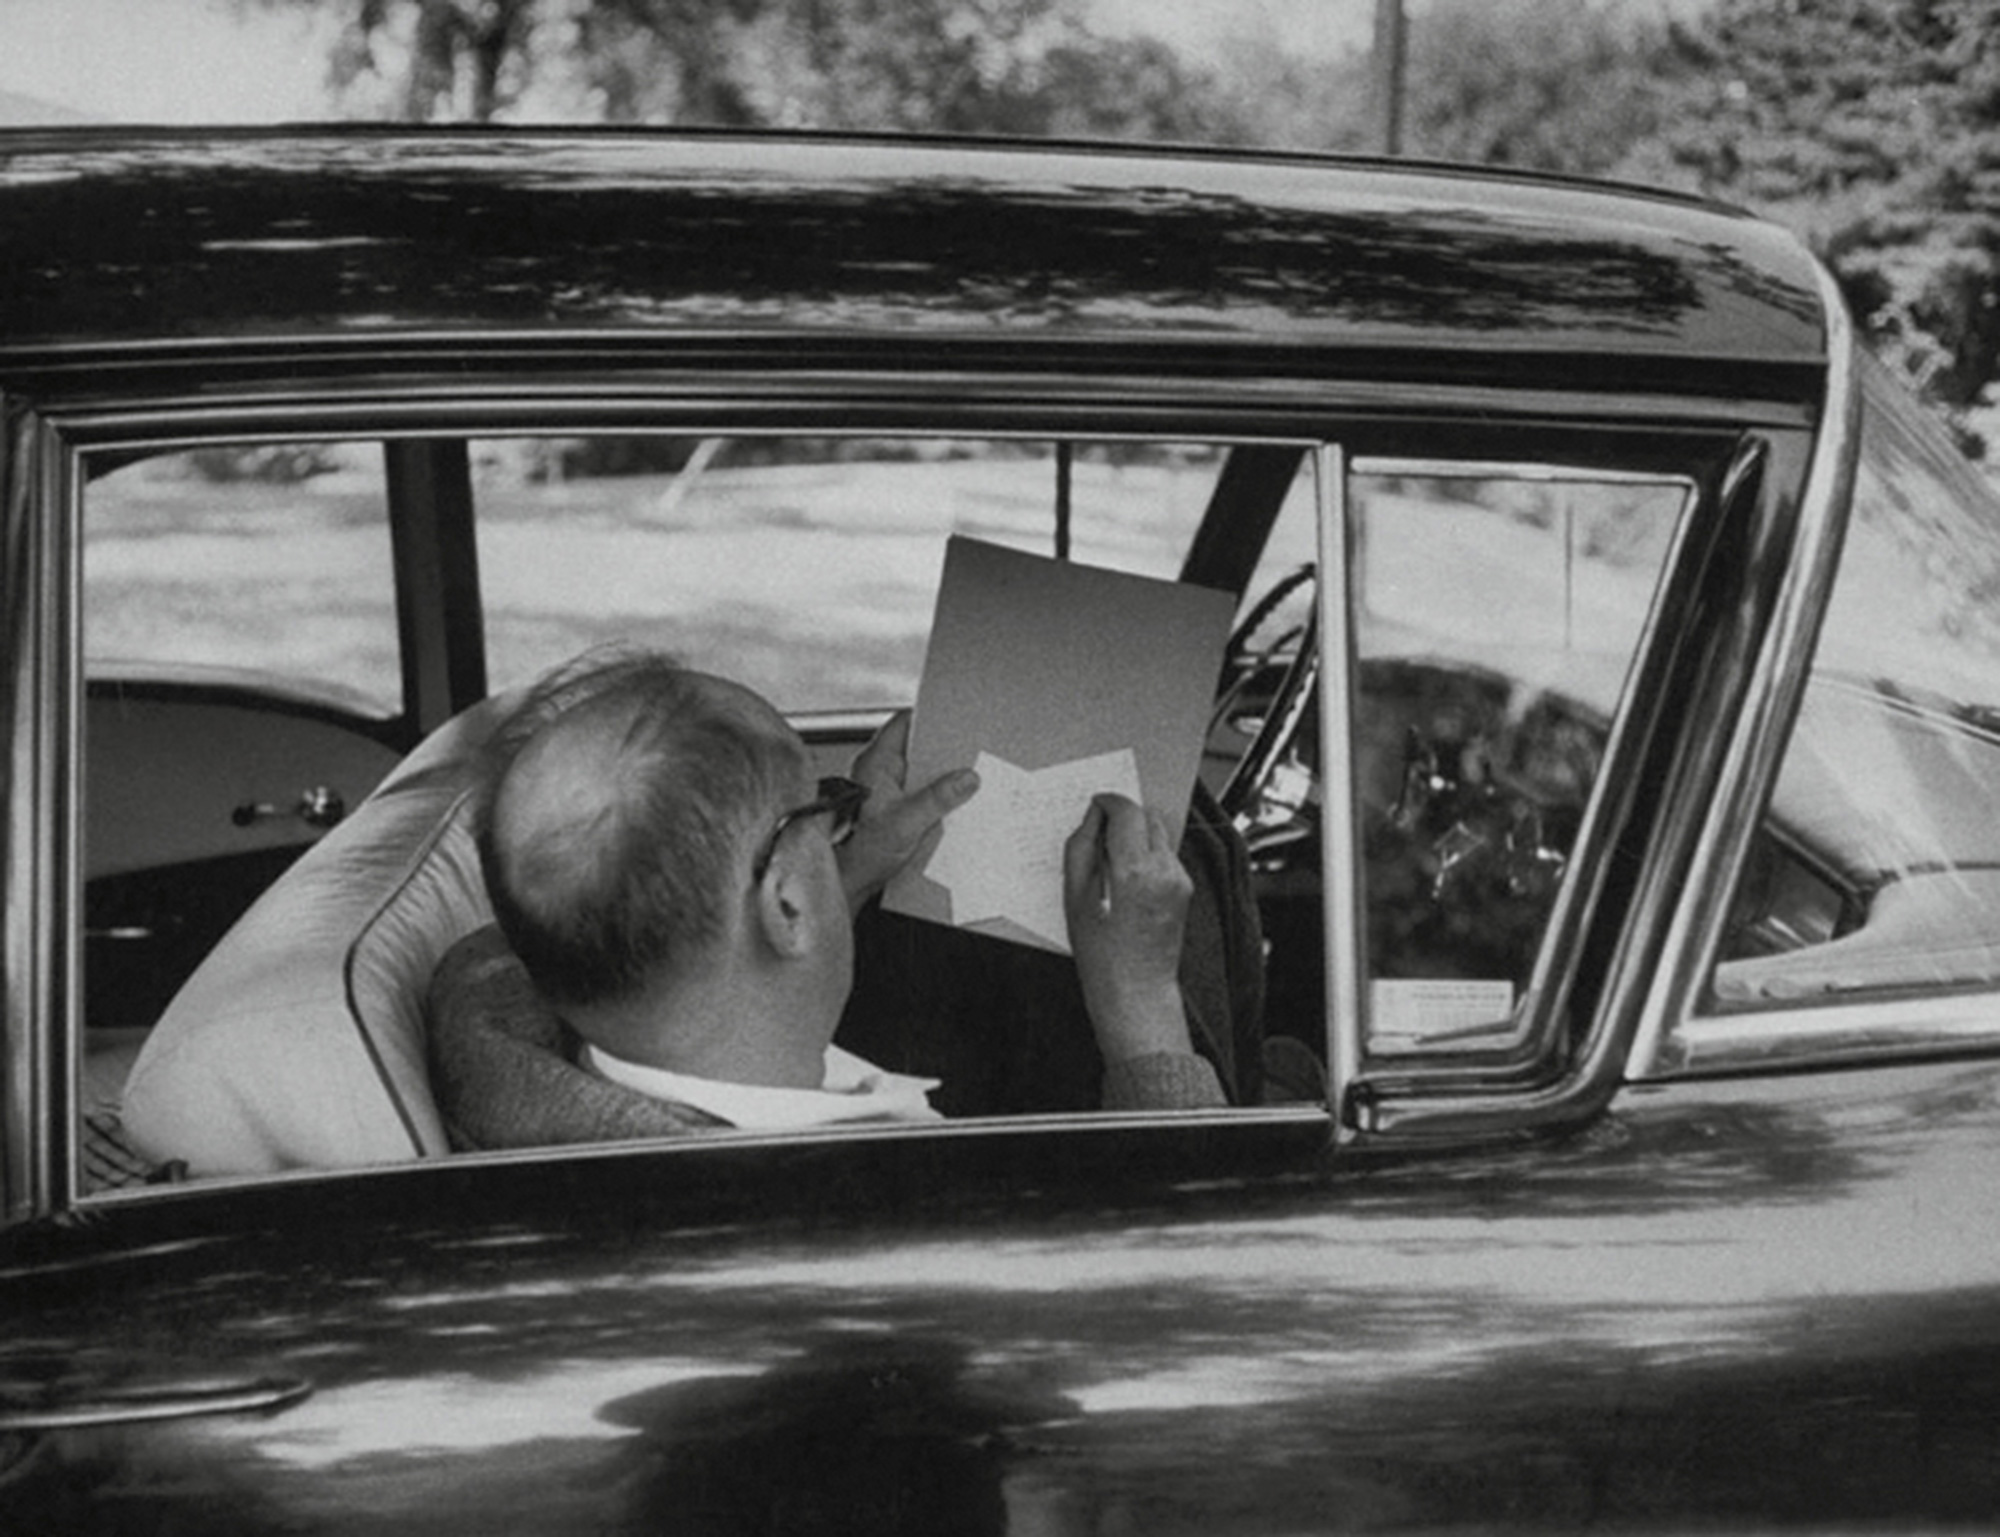 A photograph of Vladimir Nabokov scribbling on note cards in a car.